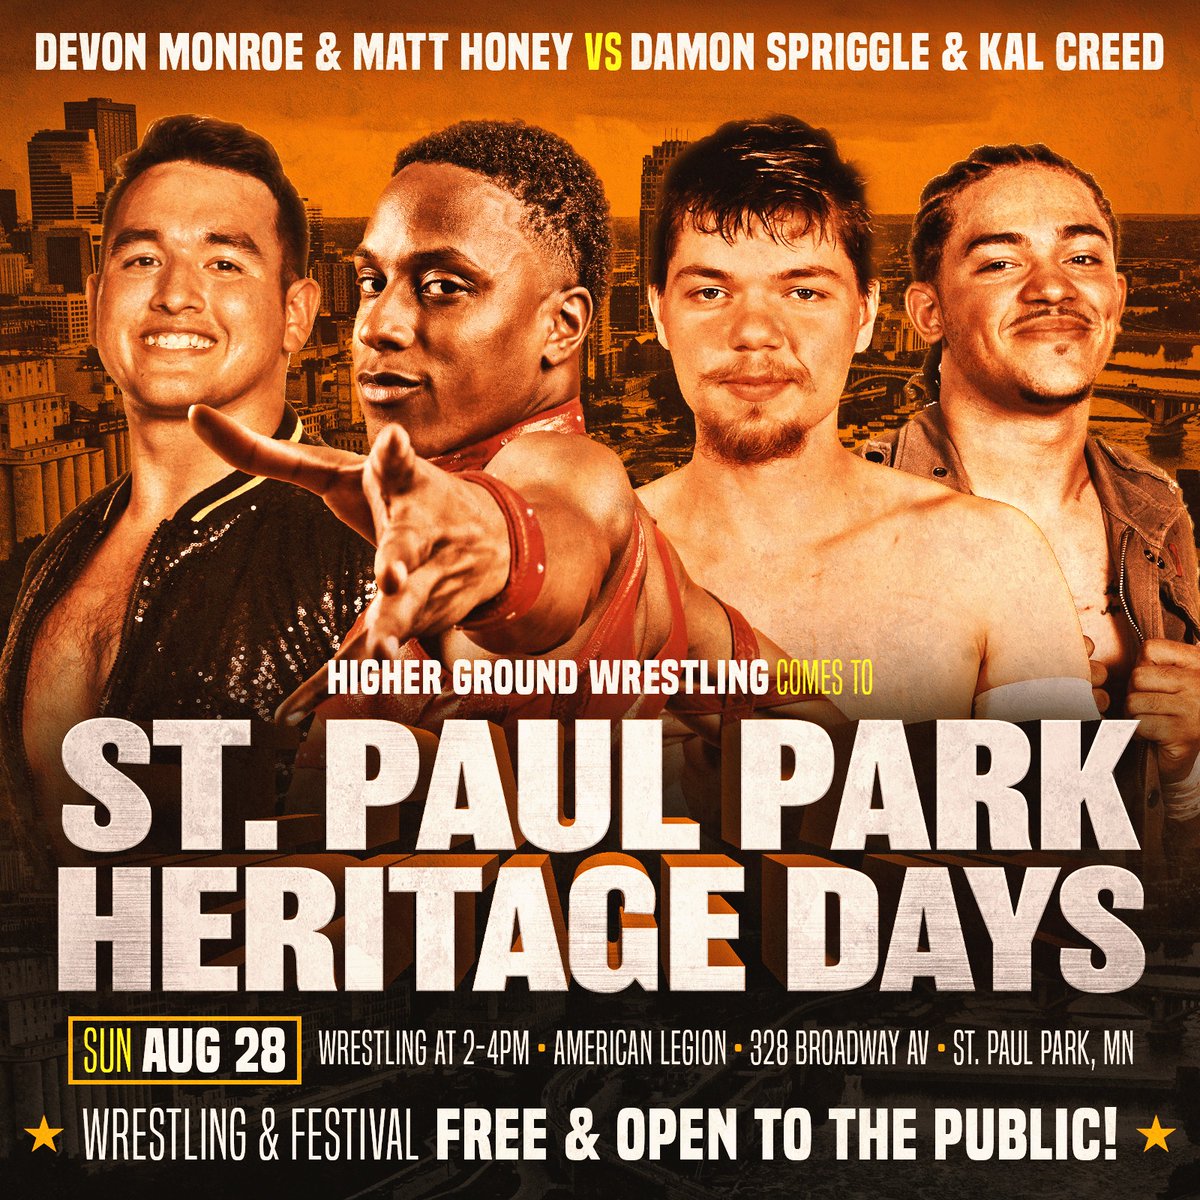 MATCH ANNOUNCEMENT!
Sunday August 28th 2022
#HeritageDays Festival in St Paul Park
Wrestling from 2PM-4PM
Festival is Free & Open to the Public

Devon Monroe & Matt Honey take on Damon Spriggle & Kal Creed!